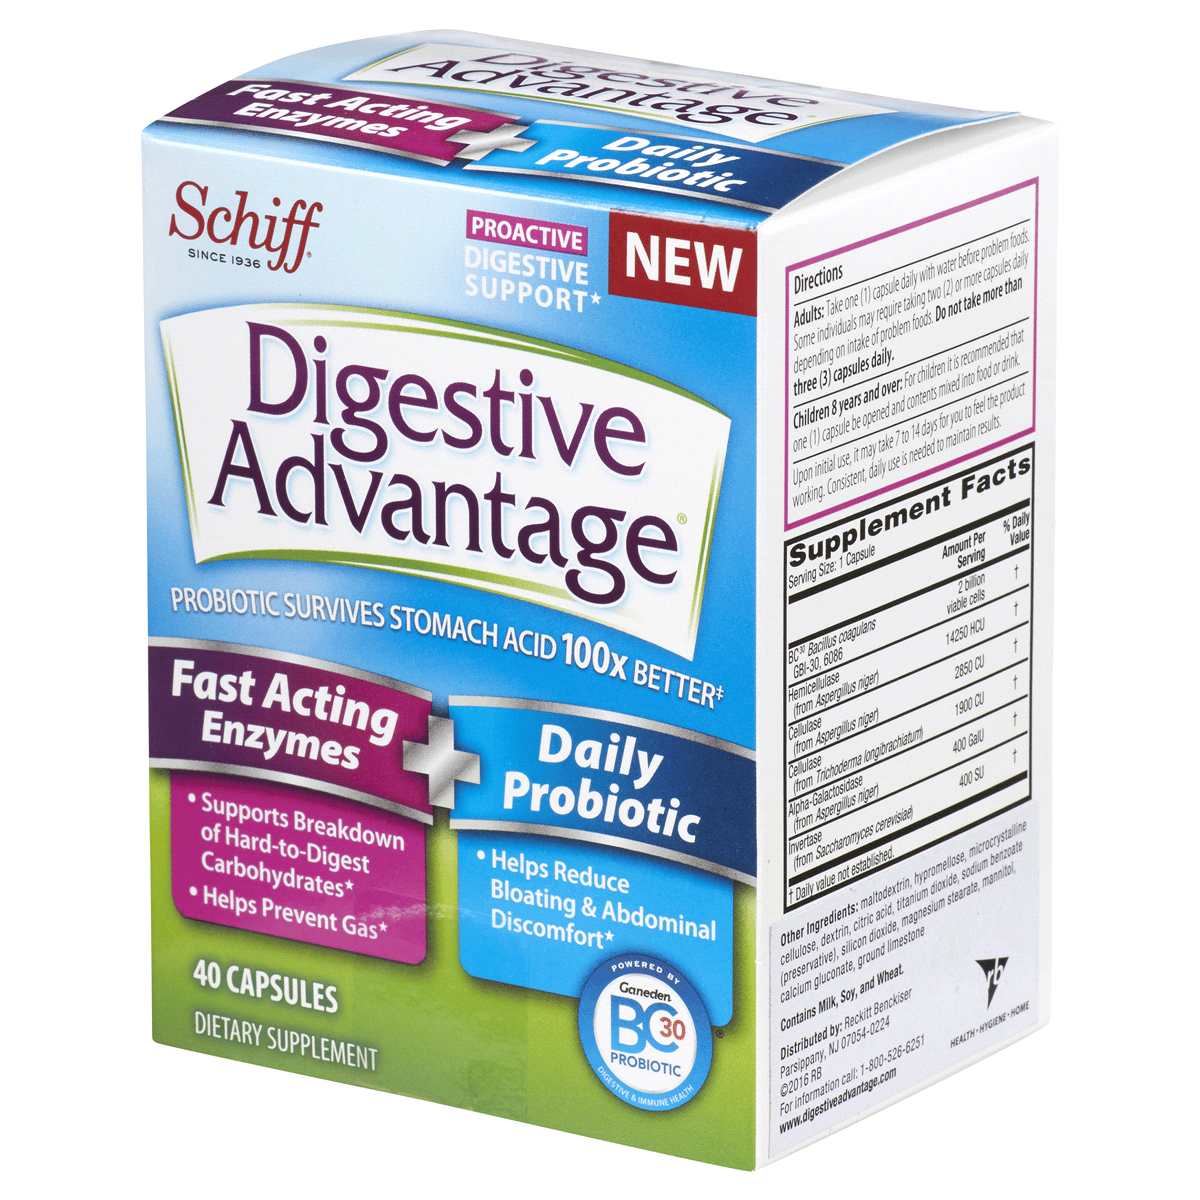 Schiff Digestive Advantage Fast Acting Enzymes plus Daily Probiotic 40 ...